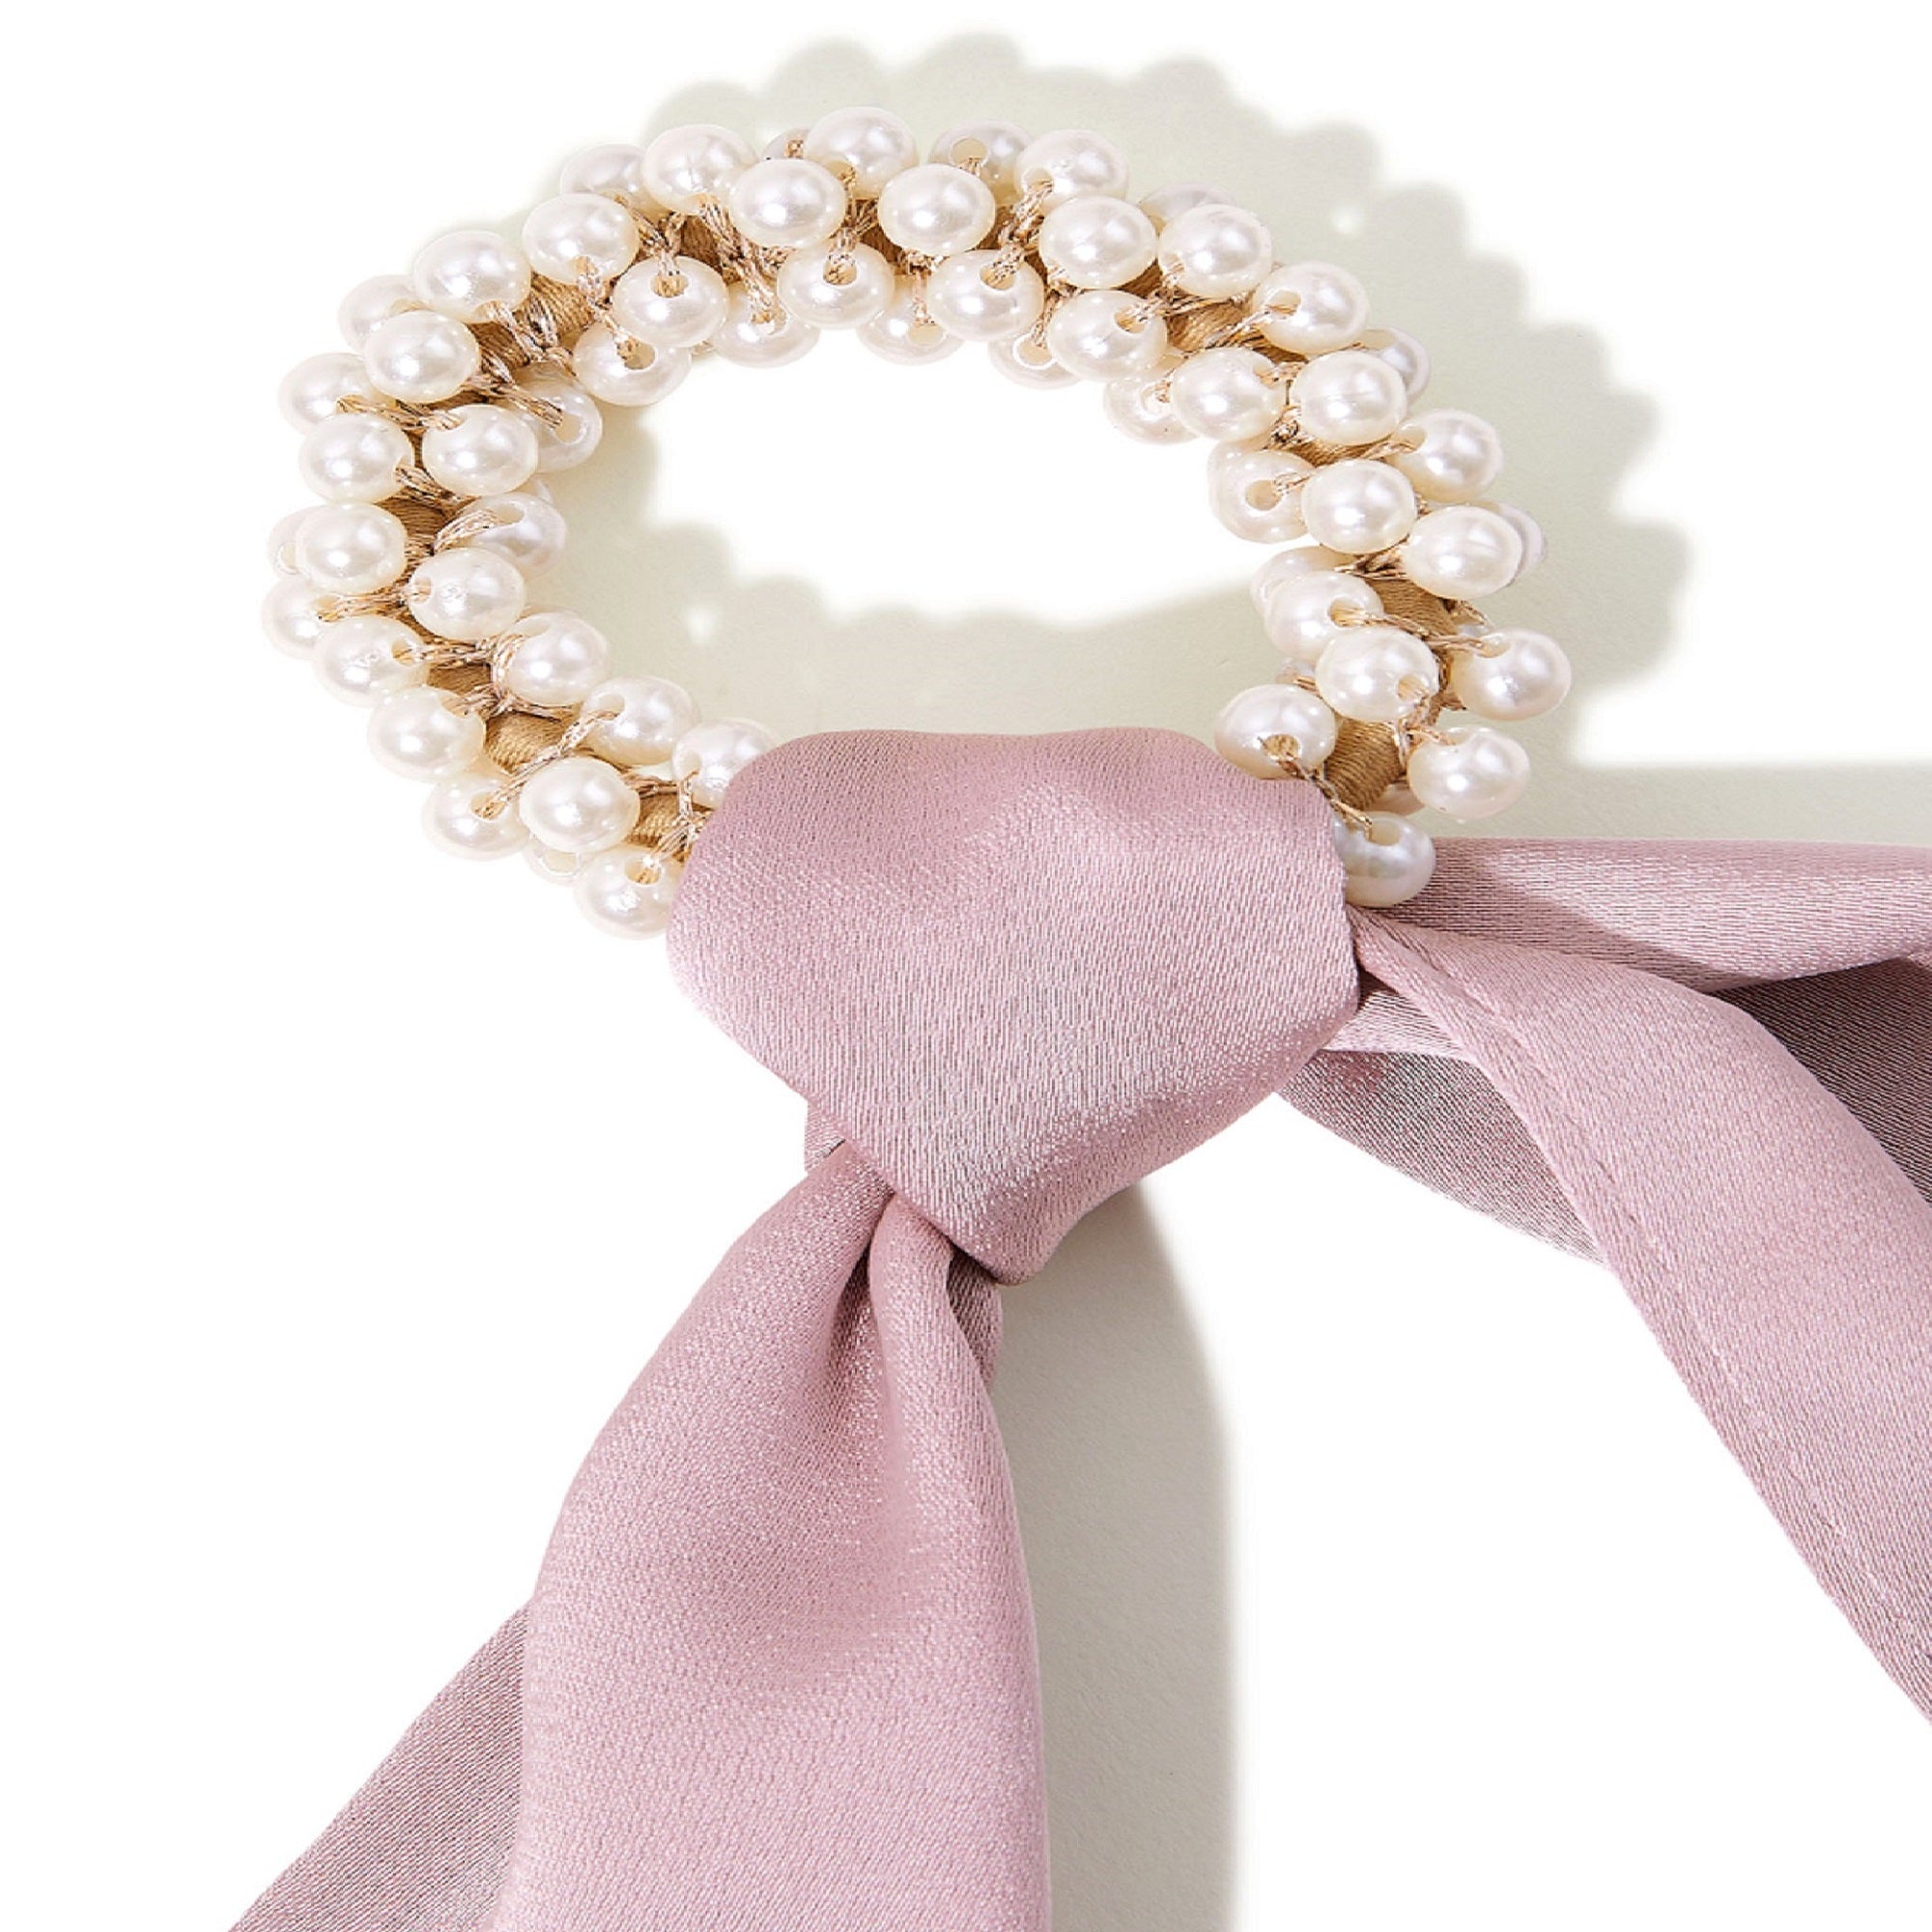 Accessorize London Women's Pearl And Pink Satin Pony